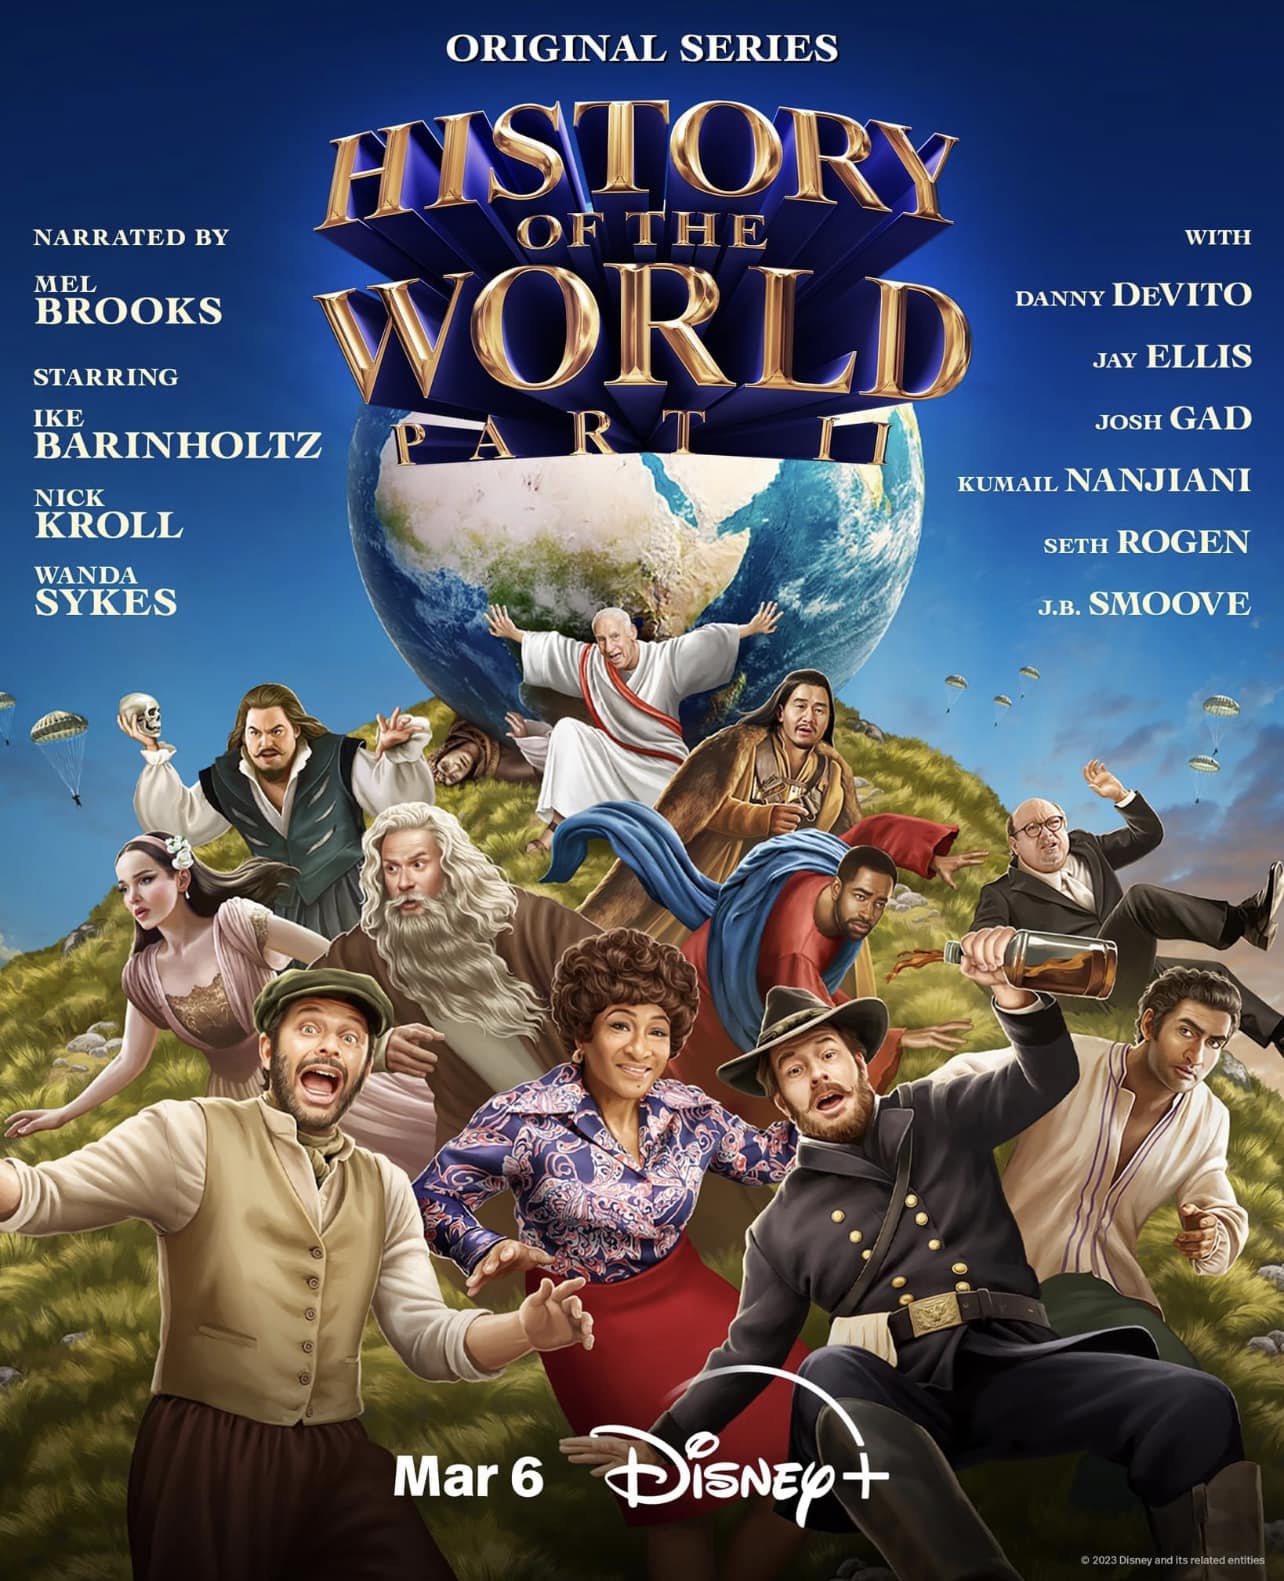 History of the World Part II Early Review